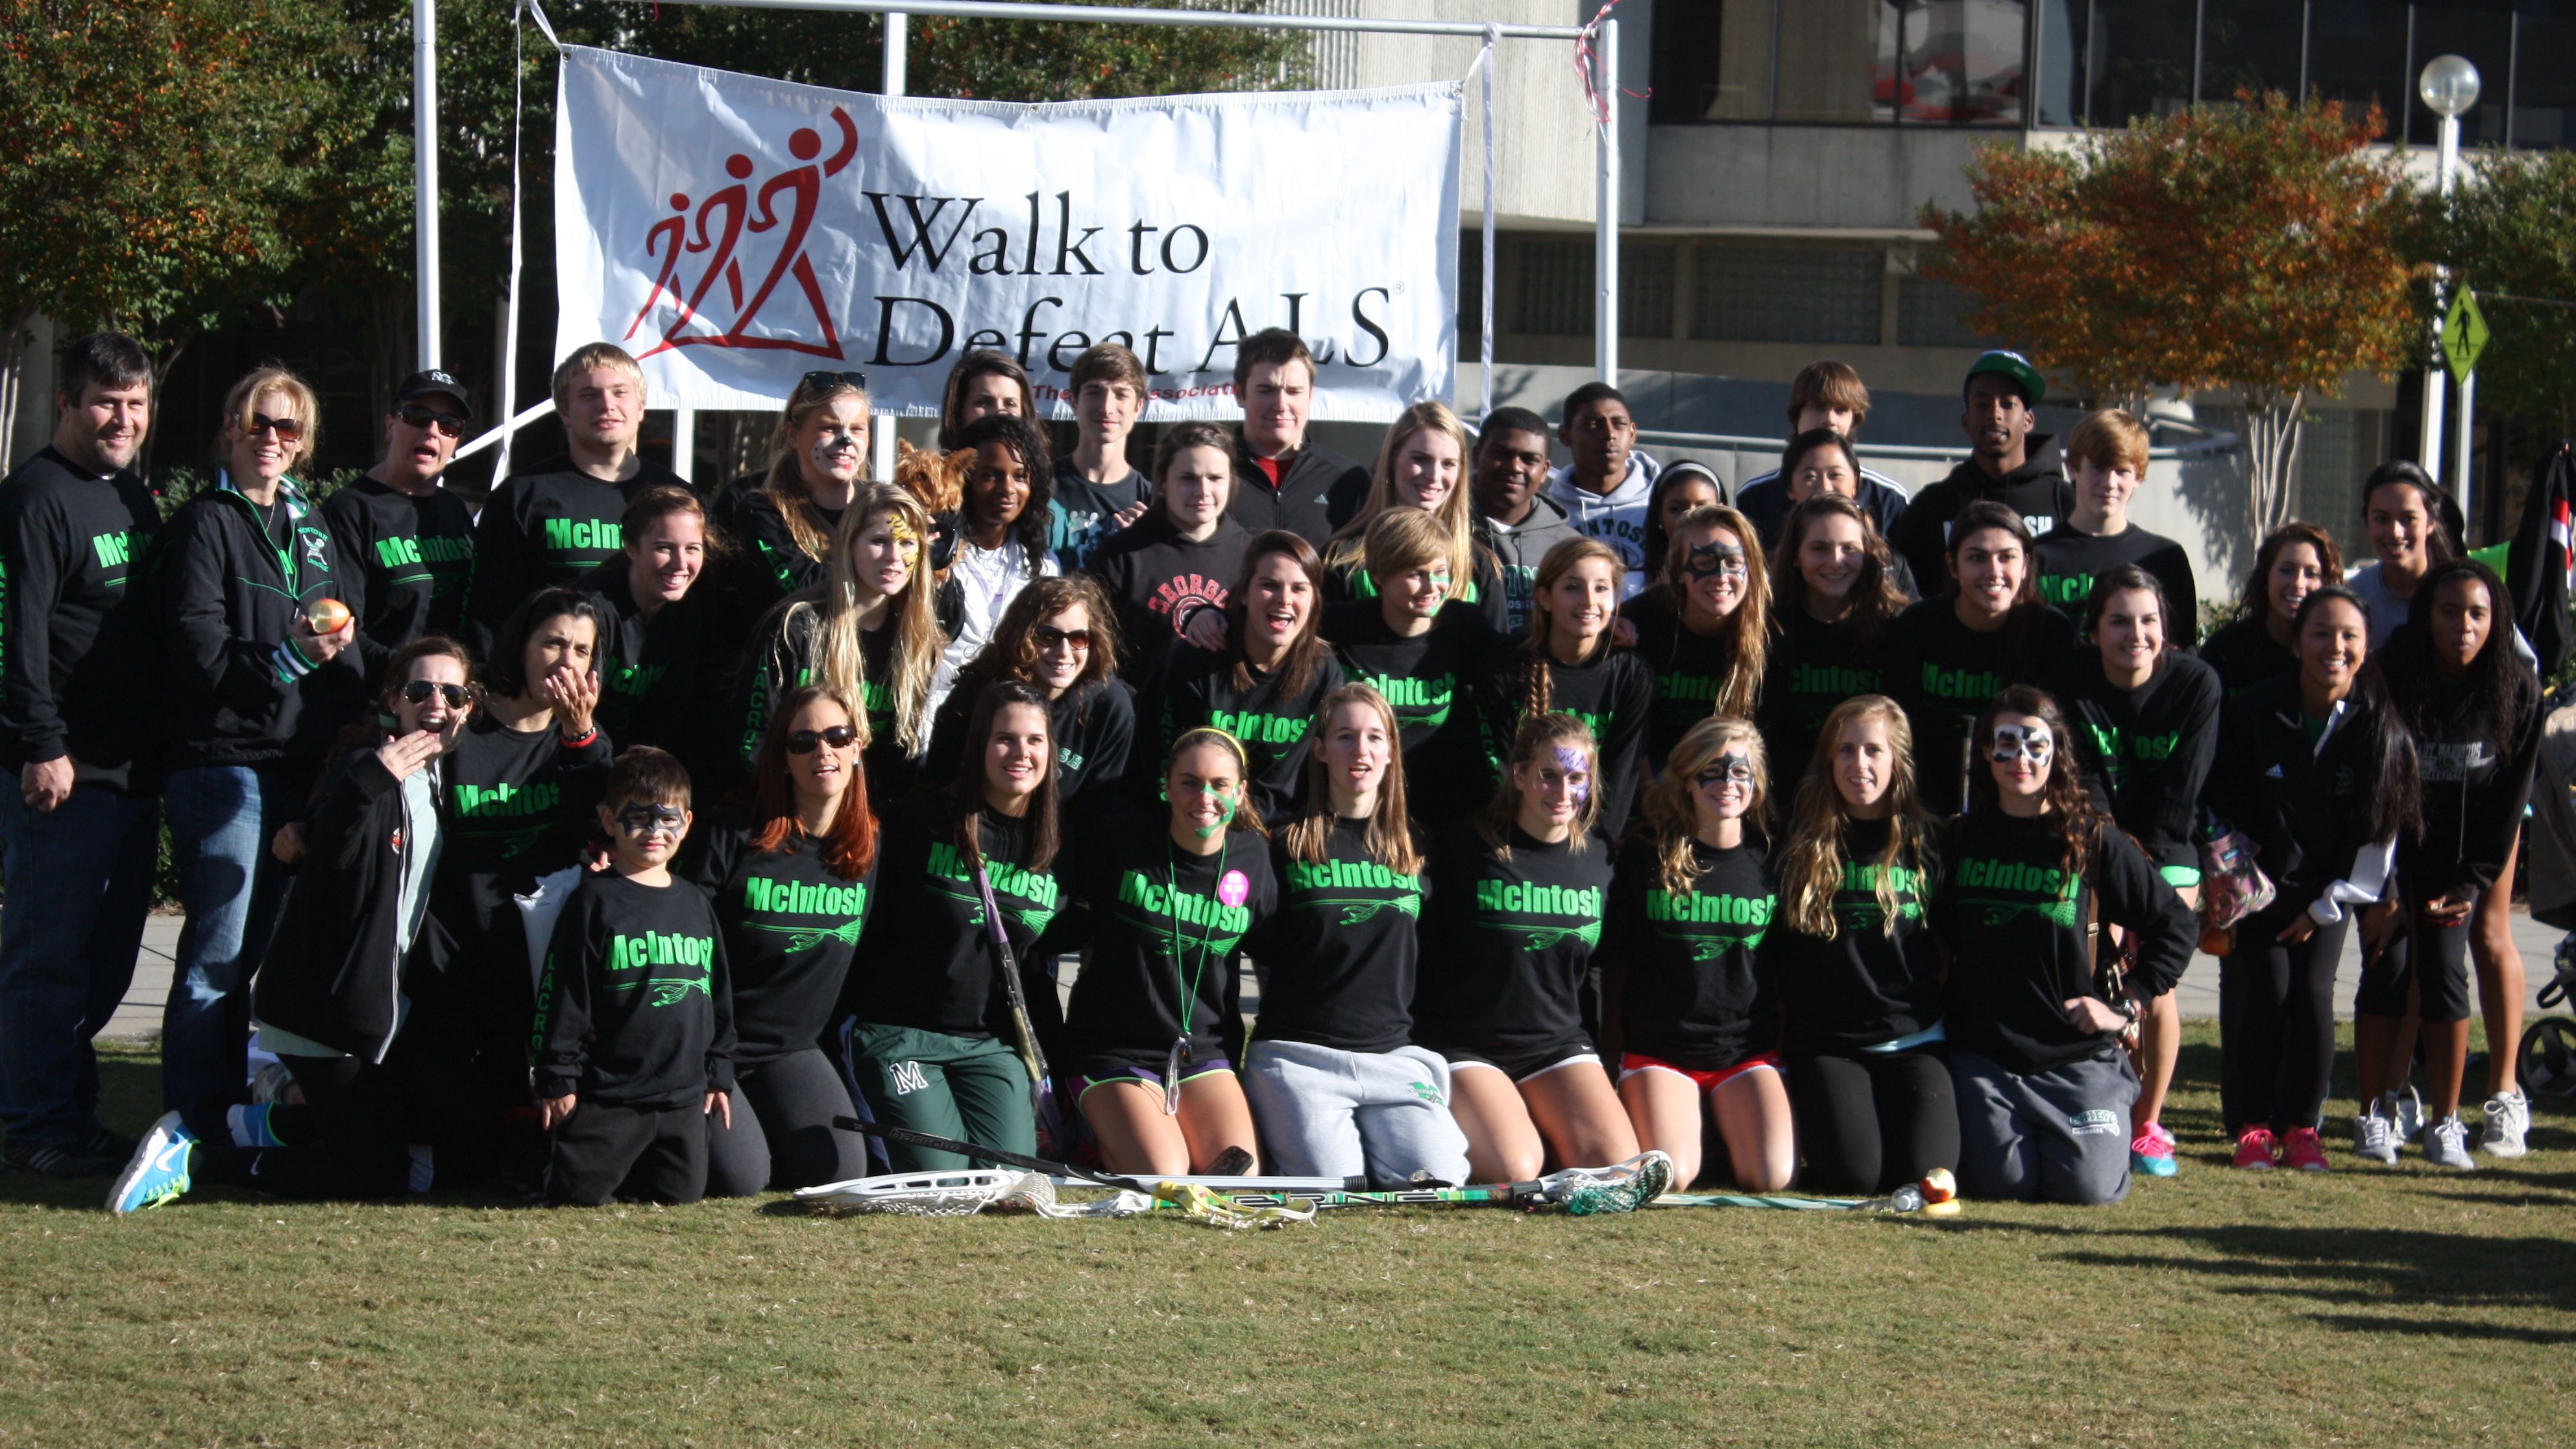 The McIntosh High School Girls Lacrosse team raise money for the ALS Association at their annual Walk to Defeat ALS event.  